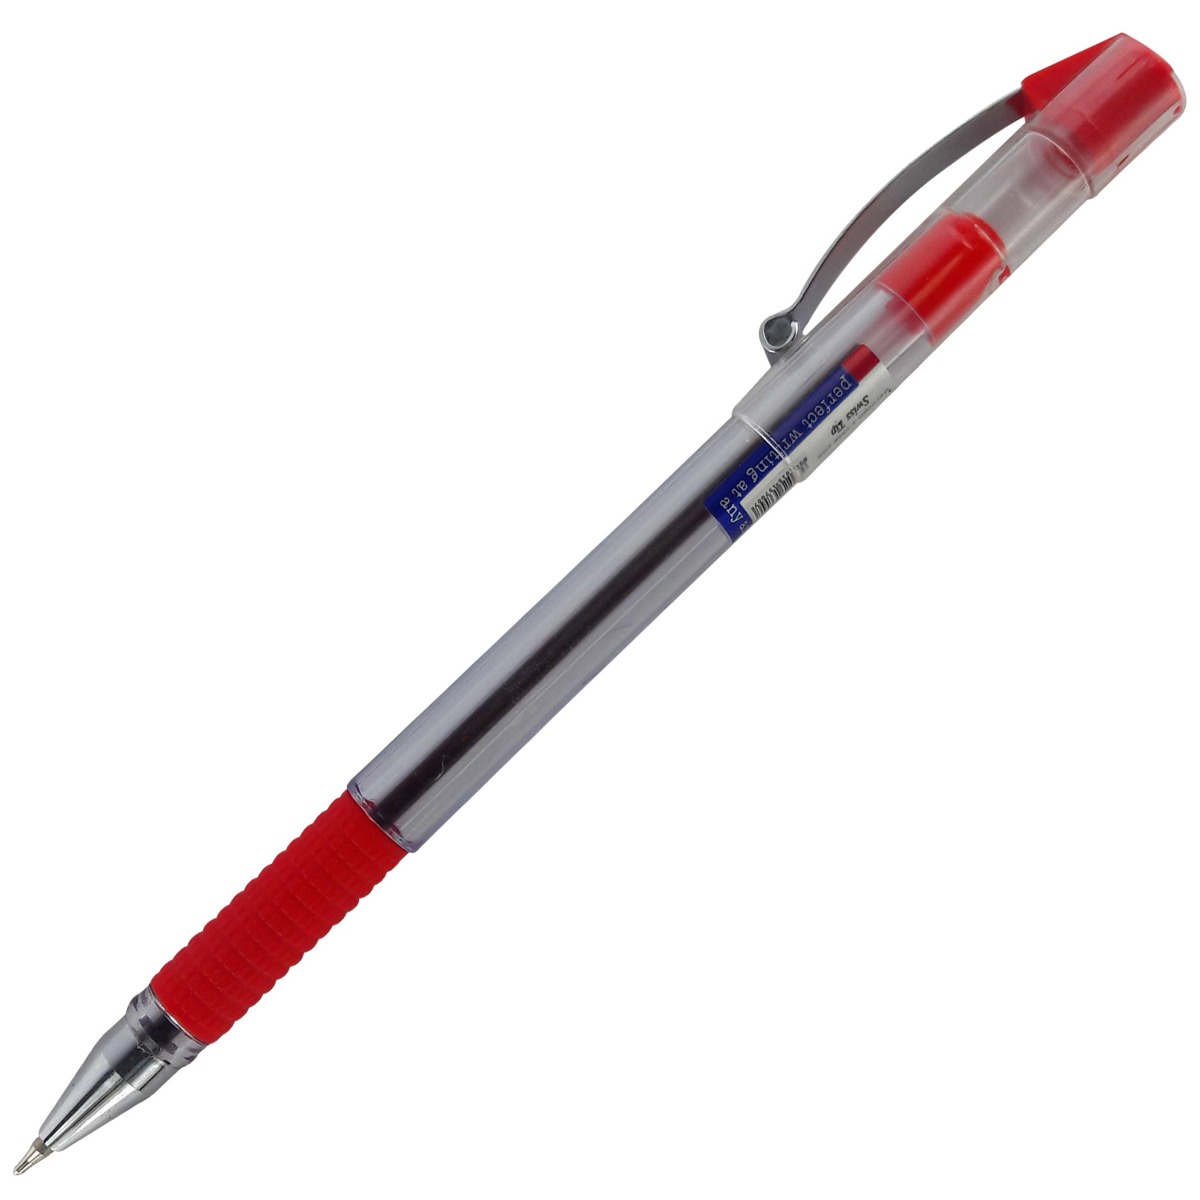 MEGO TOP – RED COLOR BALL PEN MODEL: 12789